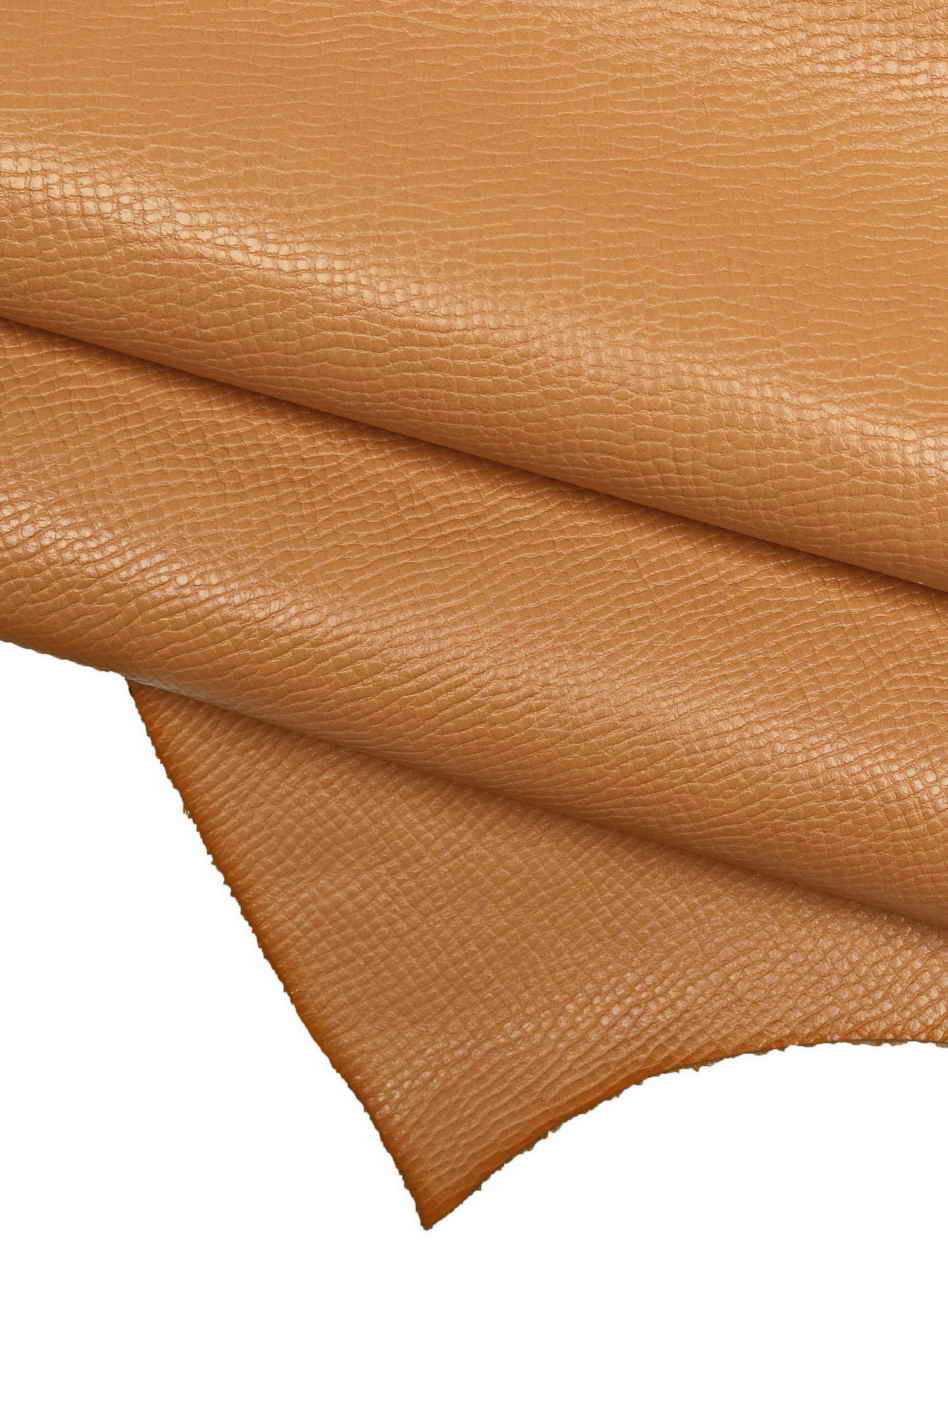 Cowhide Leather Sheet High Quality Litchi Grain Leather Sheets Craft Supply  for Leather Handbags, Leather Purse, Leather Wallets 